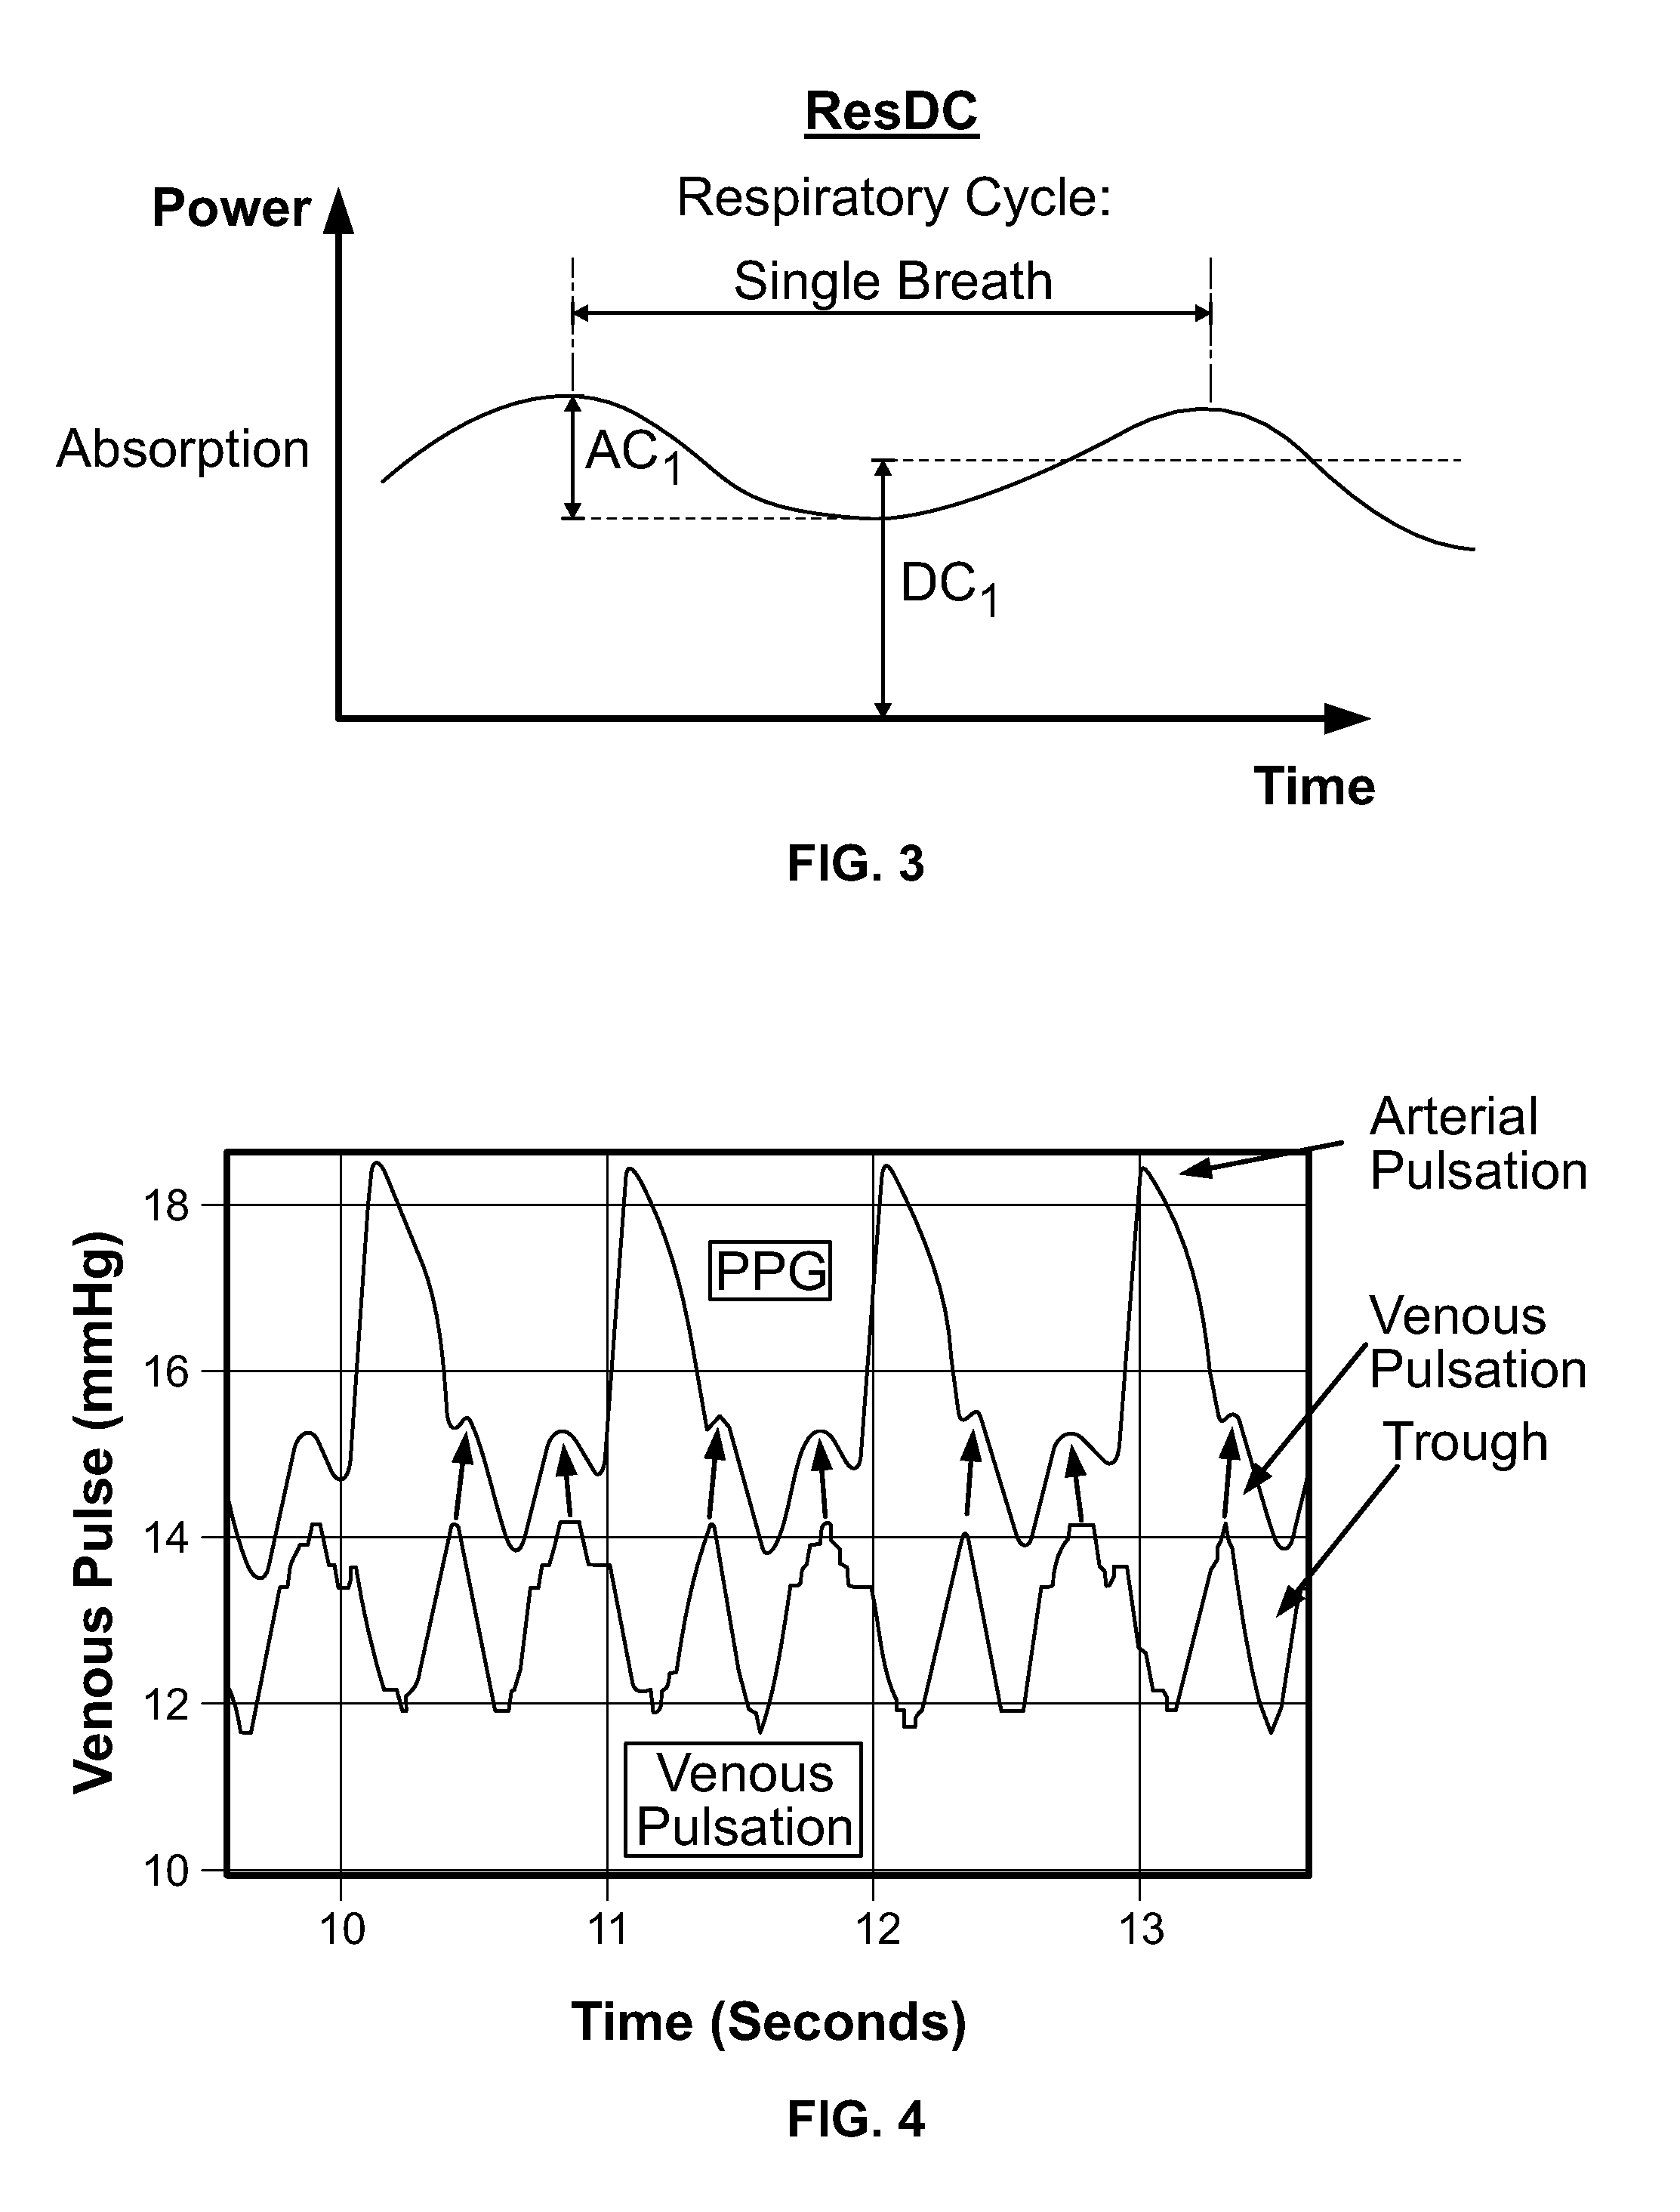 Systems and Methods Utilizing Plethysmographic Data for Distinguishing Arterial and Venous Oxygen Saturations